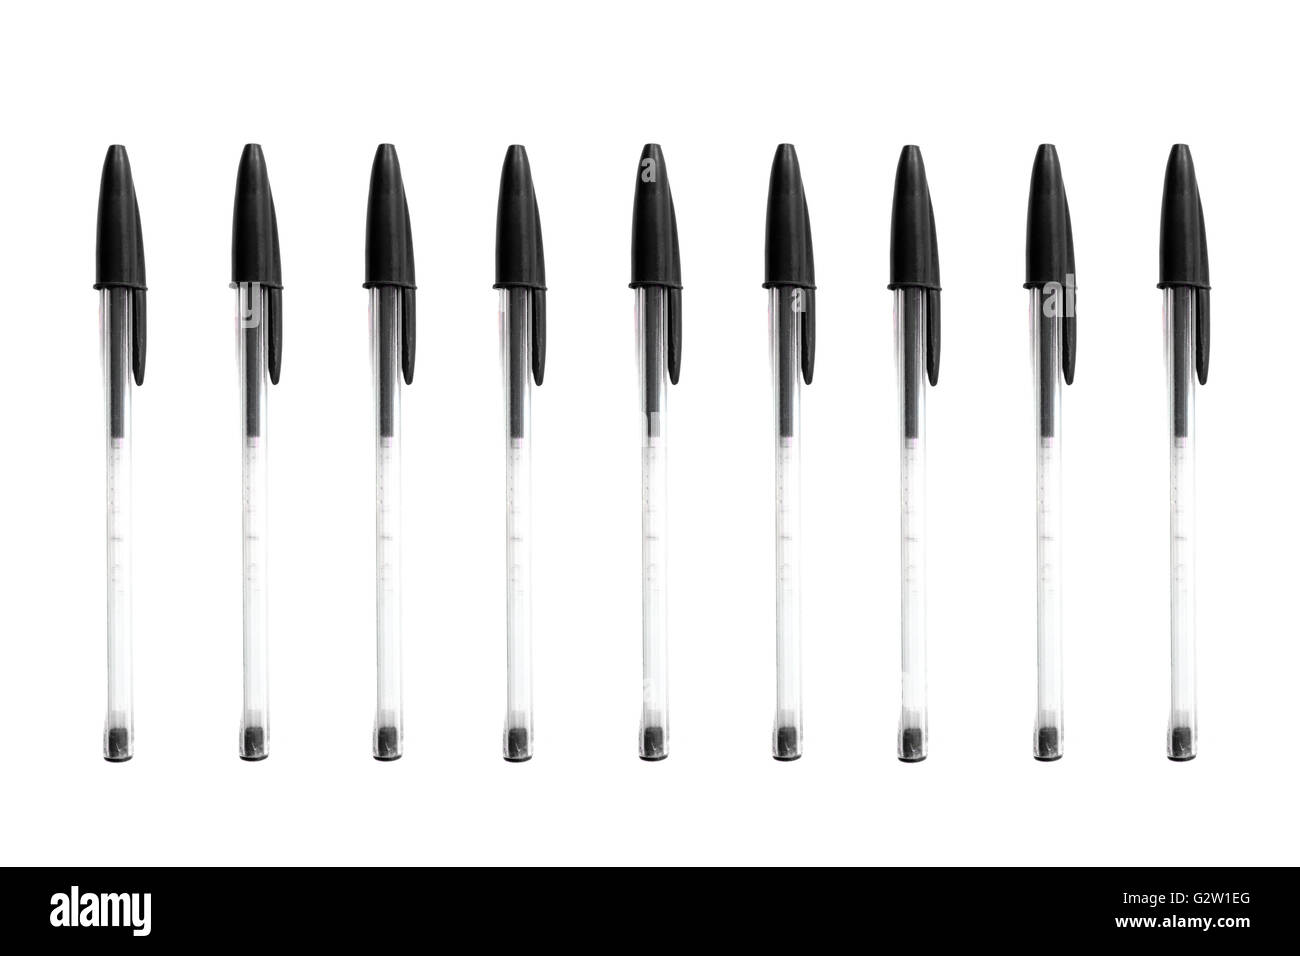 Black biro pens photographed against a white background. Stock Photo